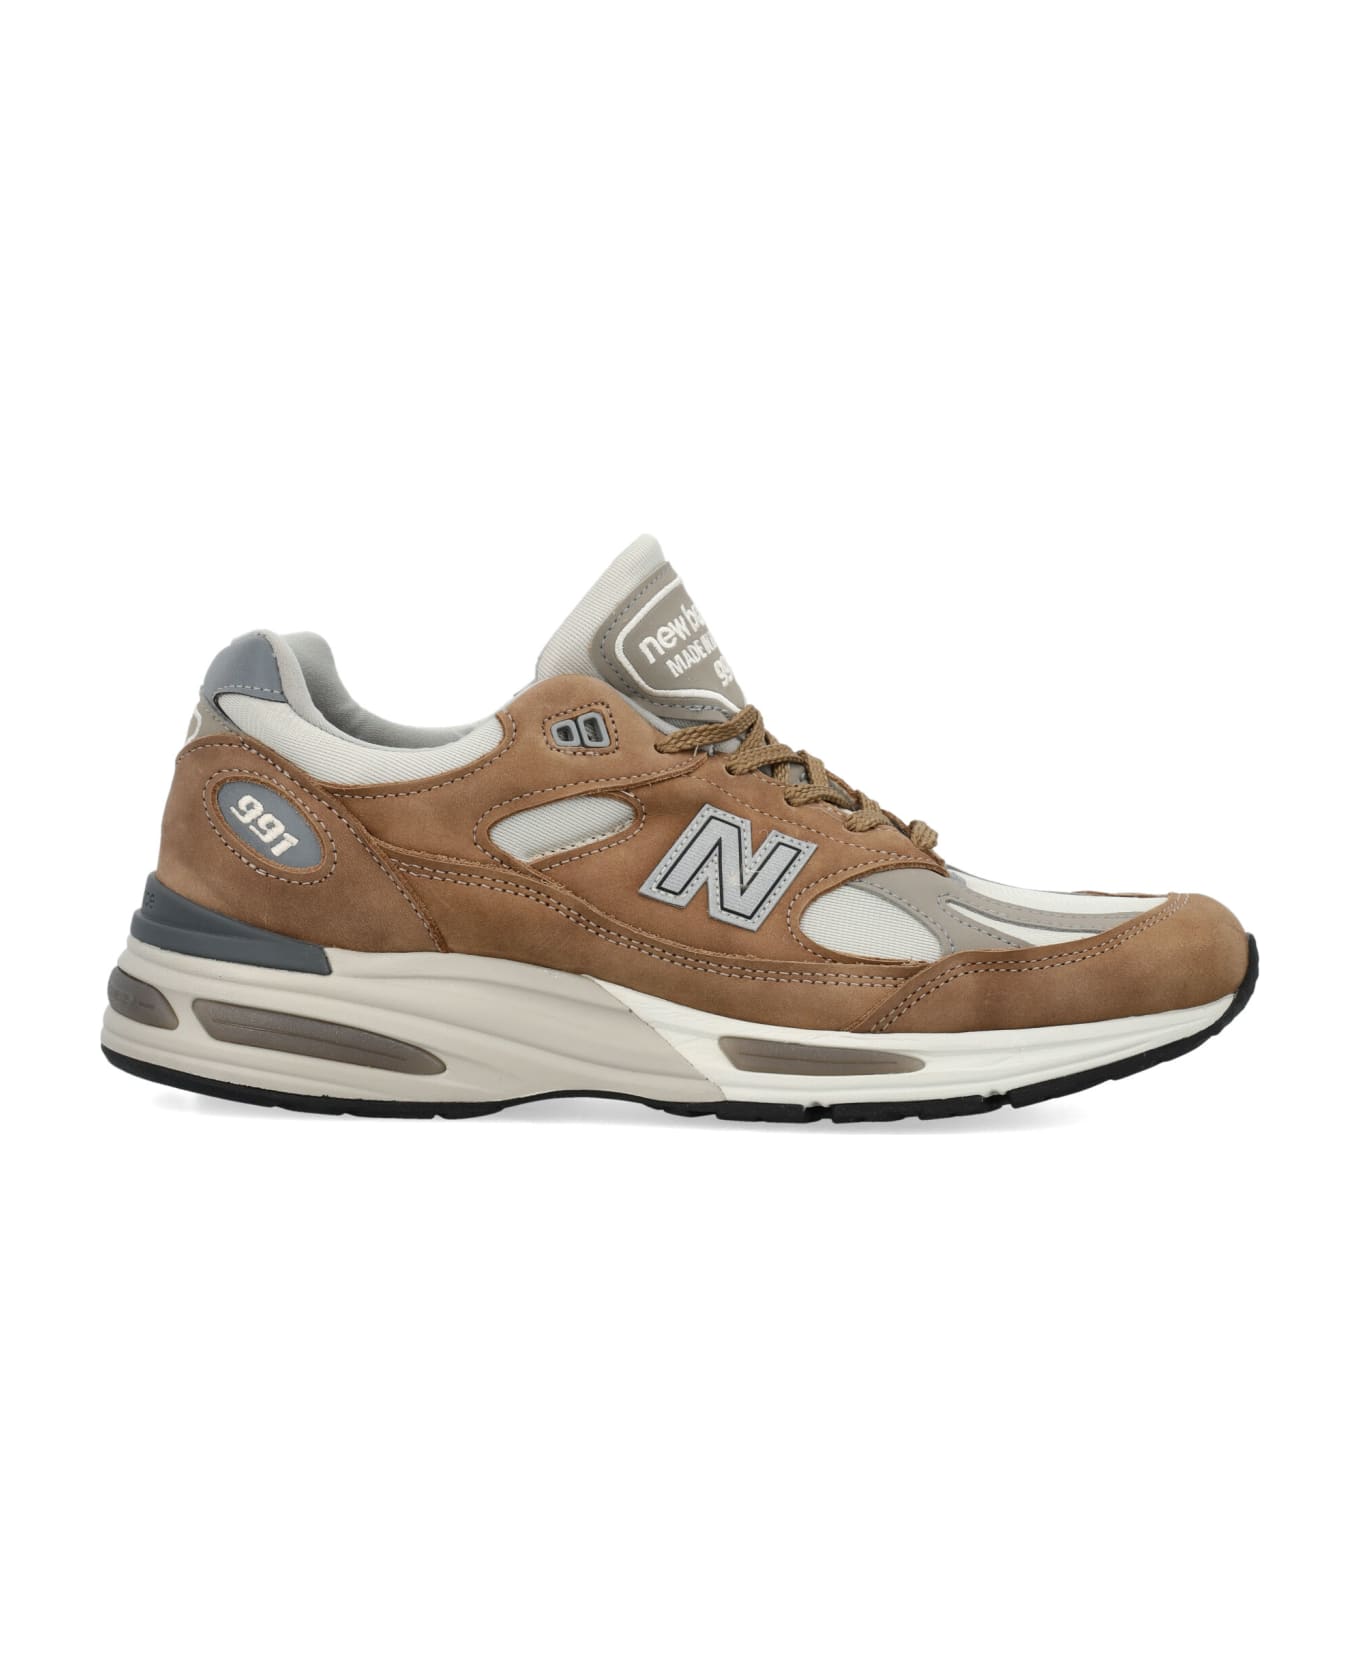 New Balance 991 Sneakers - BROWN